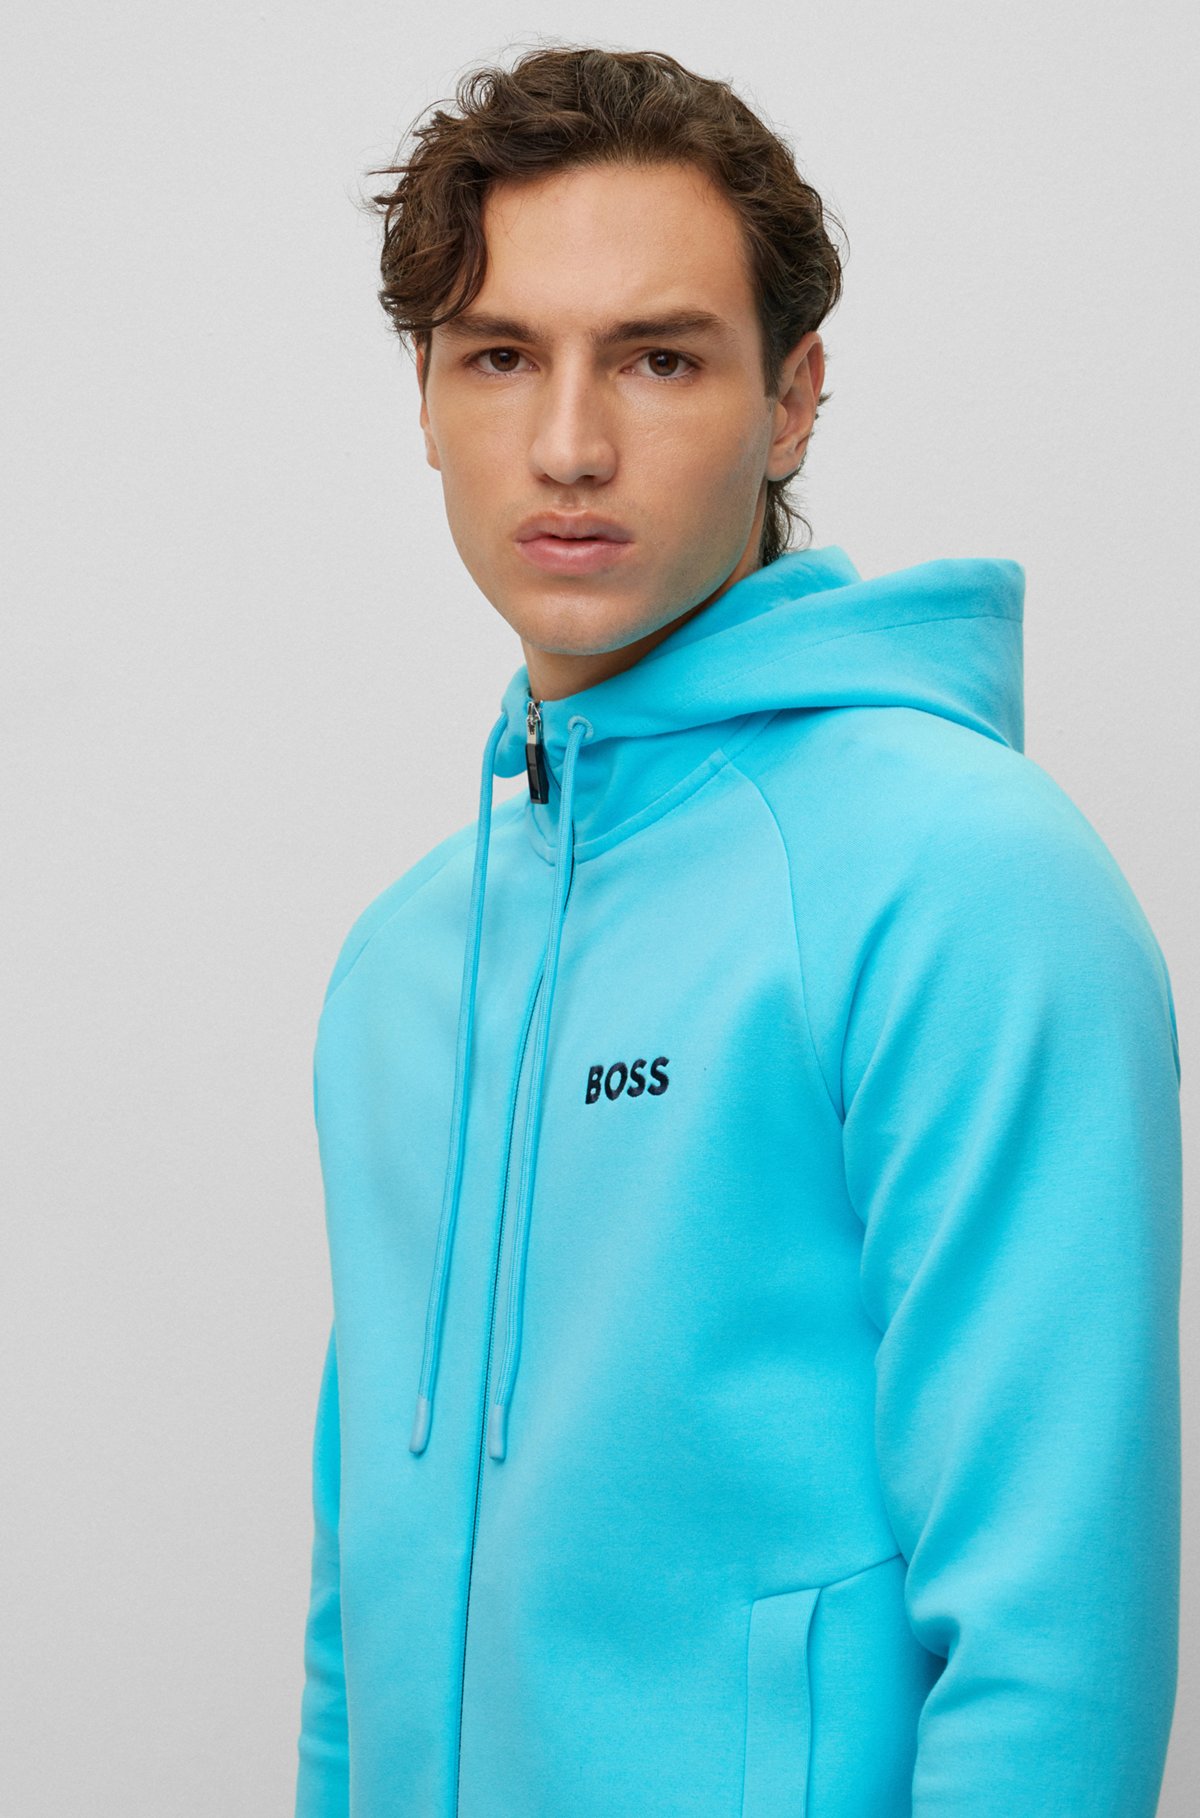 BOSS - Cotton-blend zip-up hoodie with contrast logo